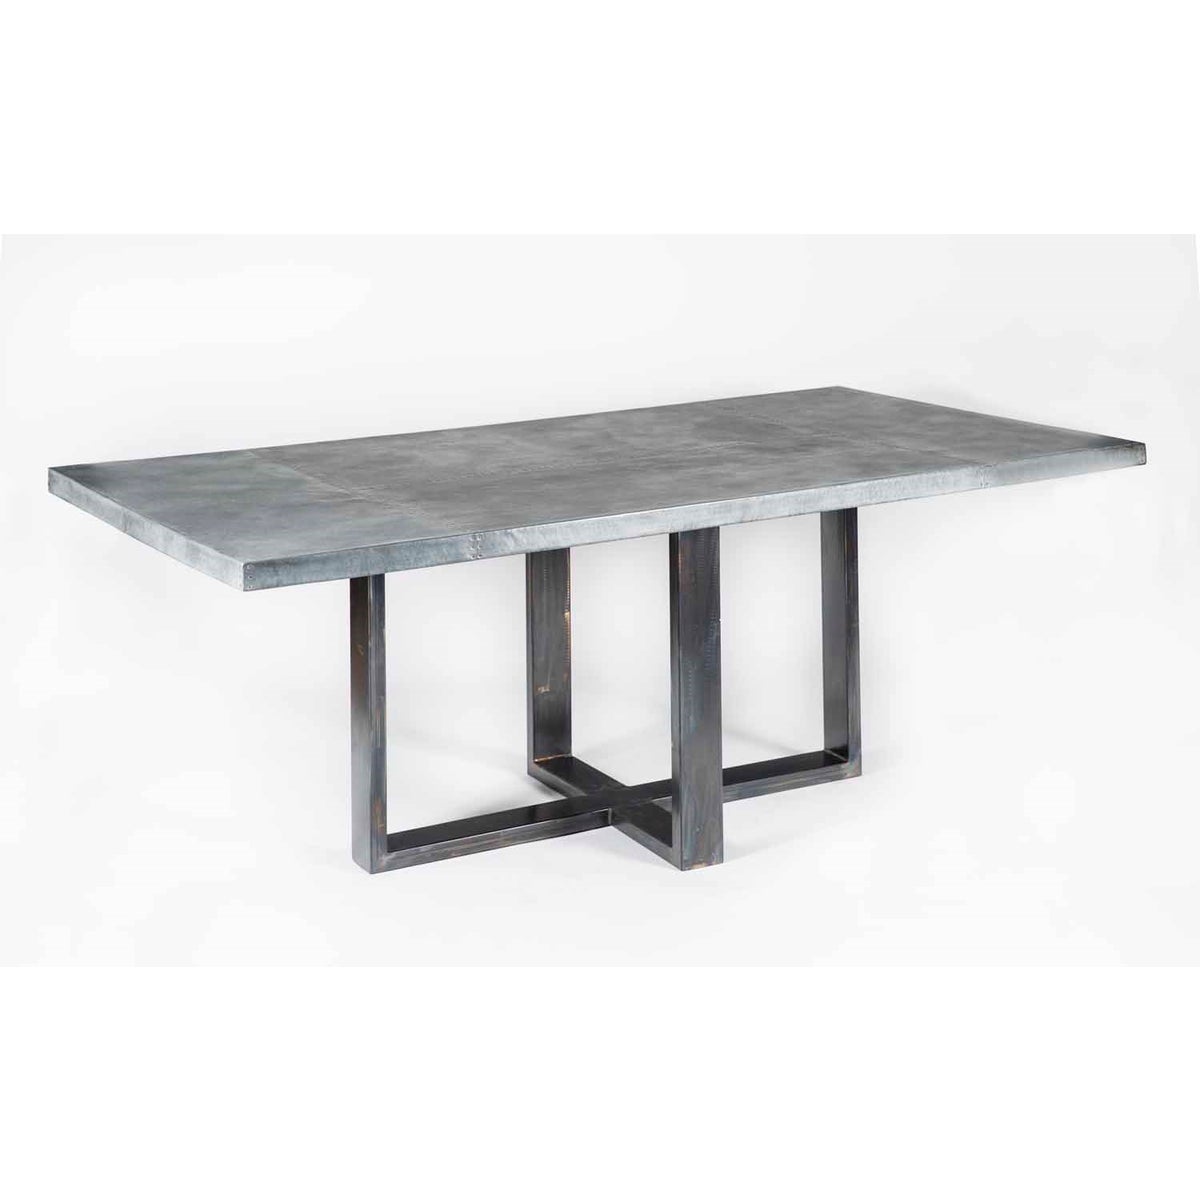 Liam Dining Table with 84" x 44" Acid Washed Rectangle Hammered Zinc Top